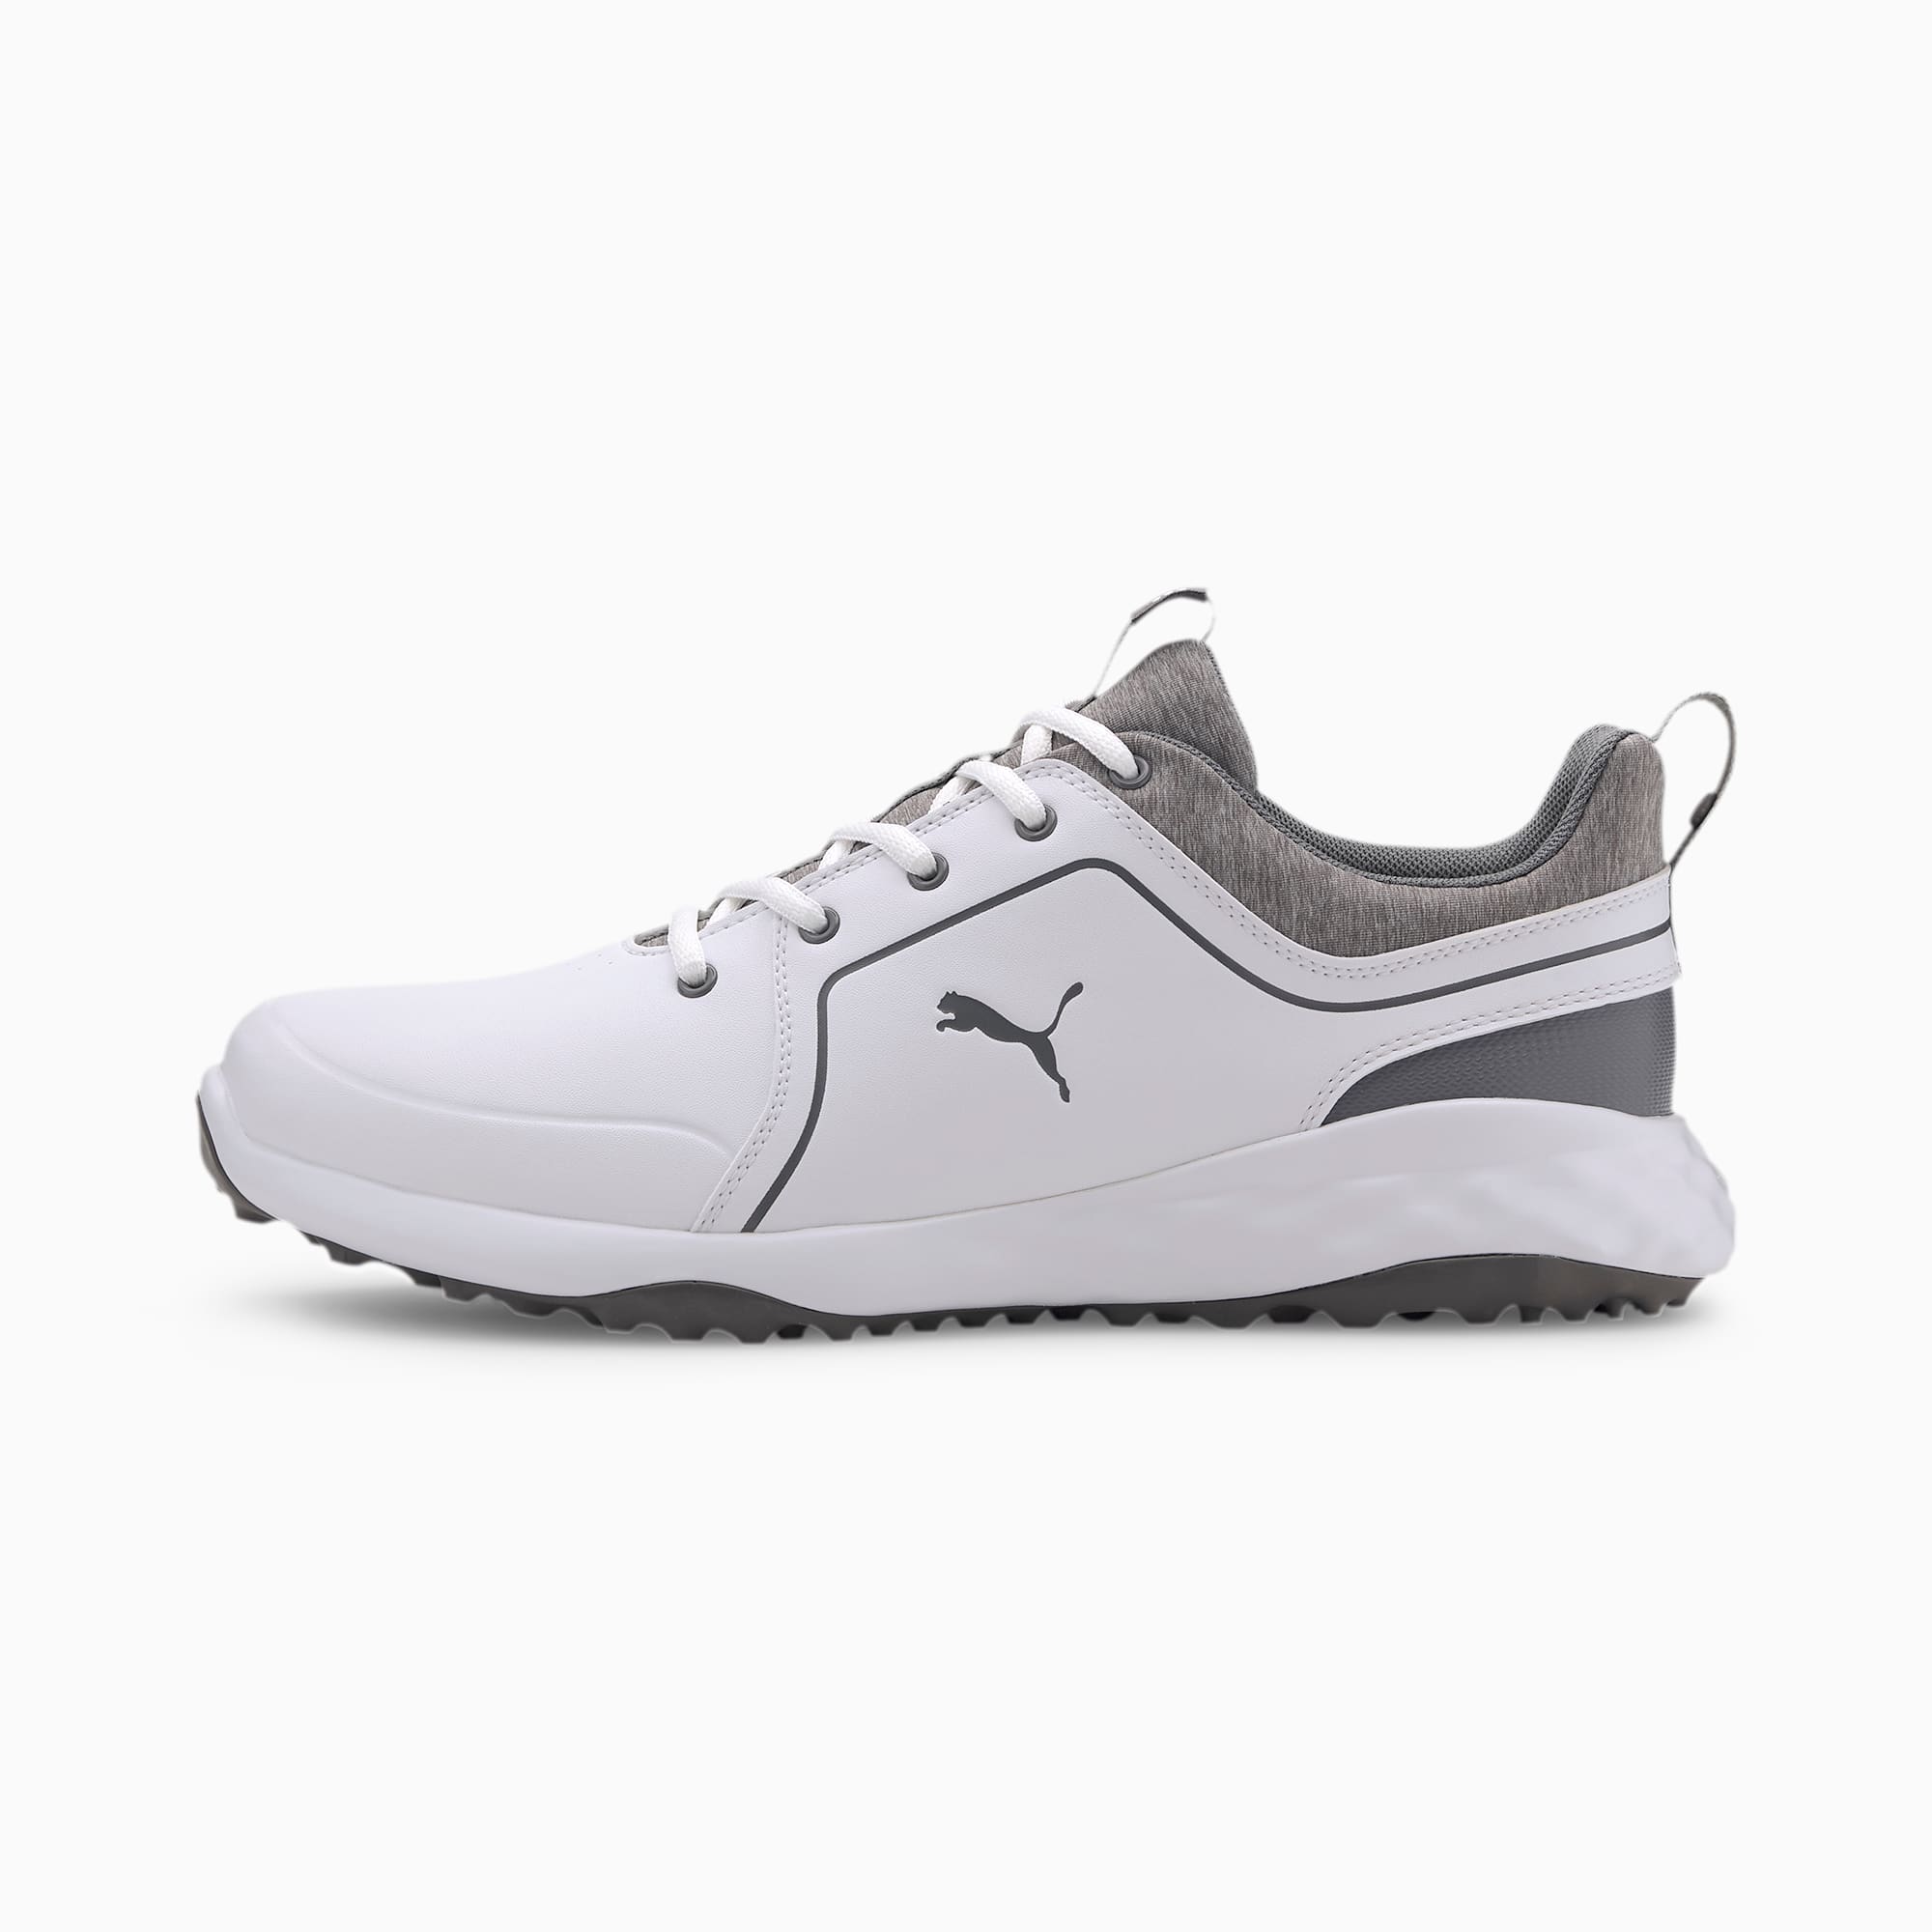 Caged IGNITE PWRADAPT Men's Golf Shoes 